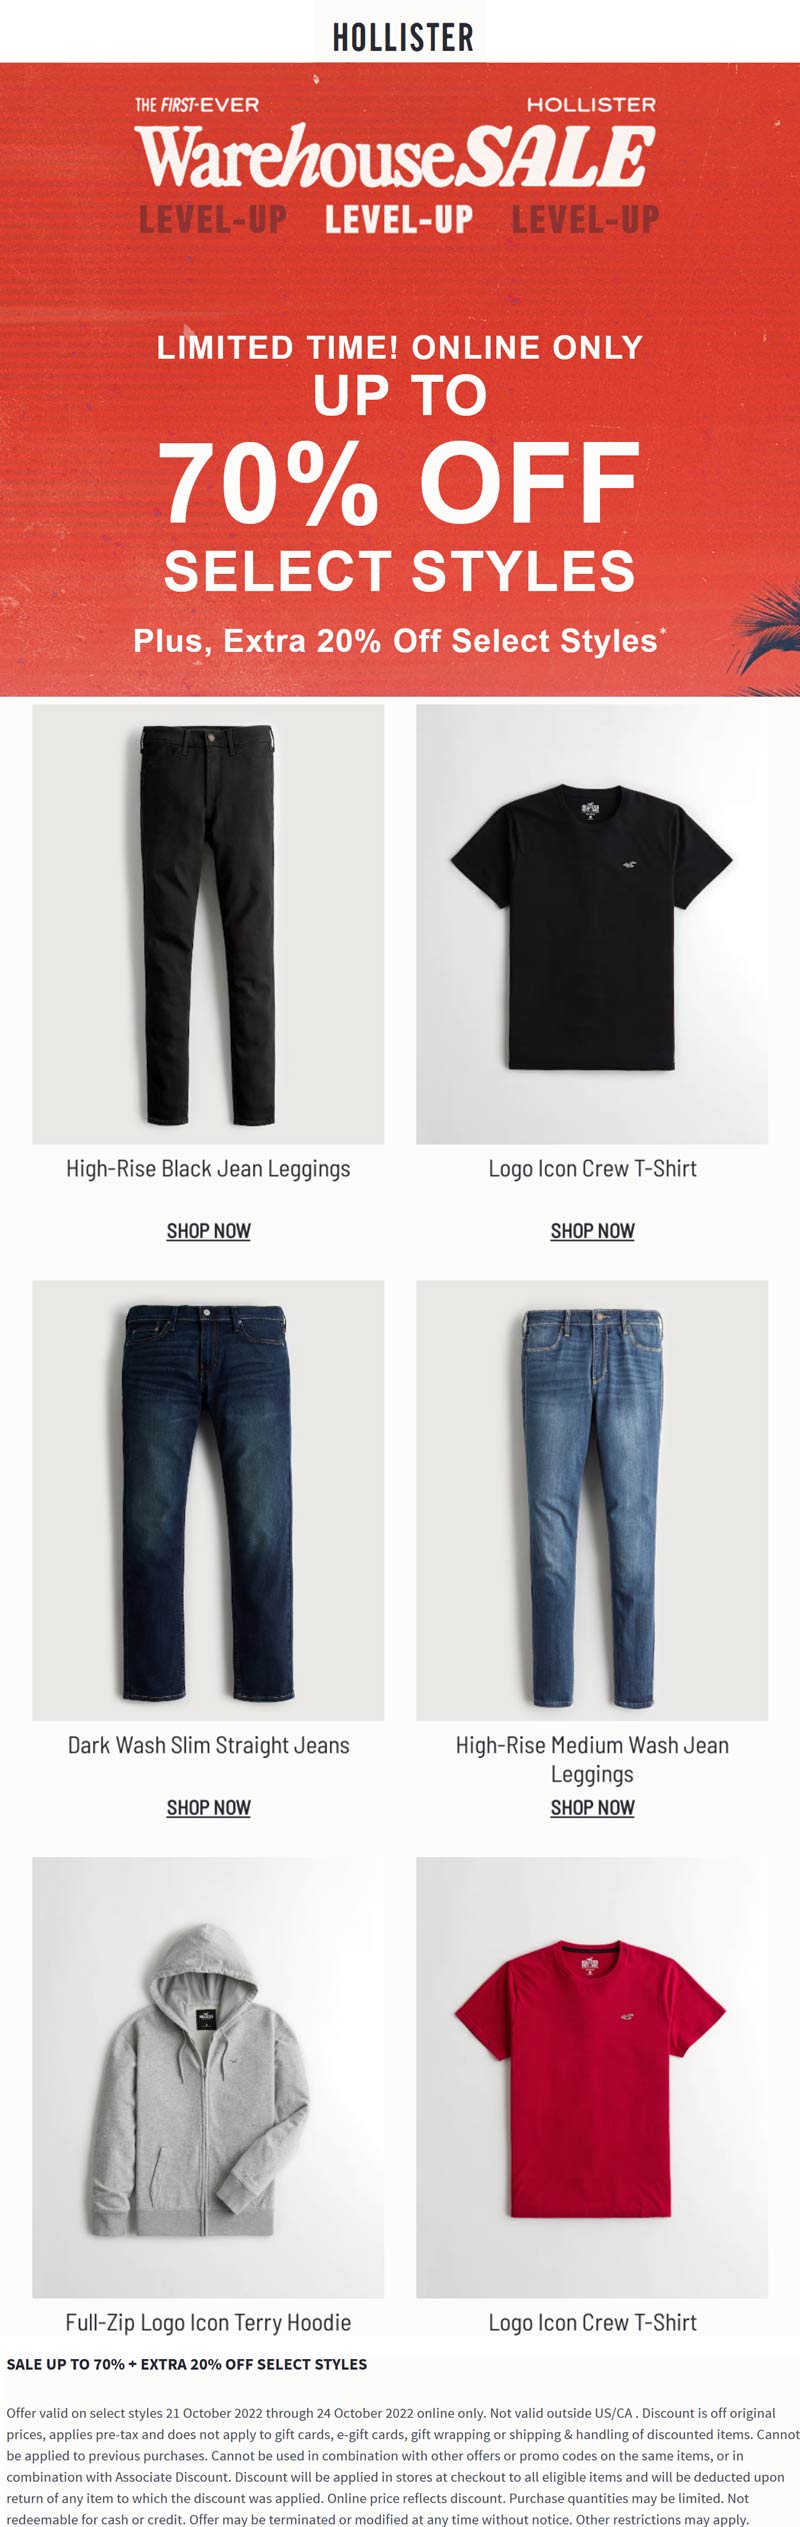 Hollister stores Coupon  70-90% off various styles online at Hollister #hollister 